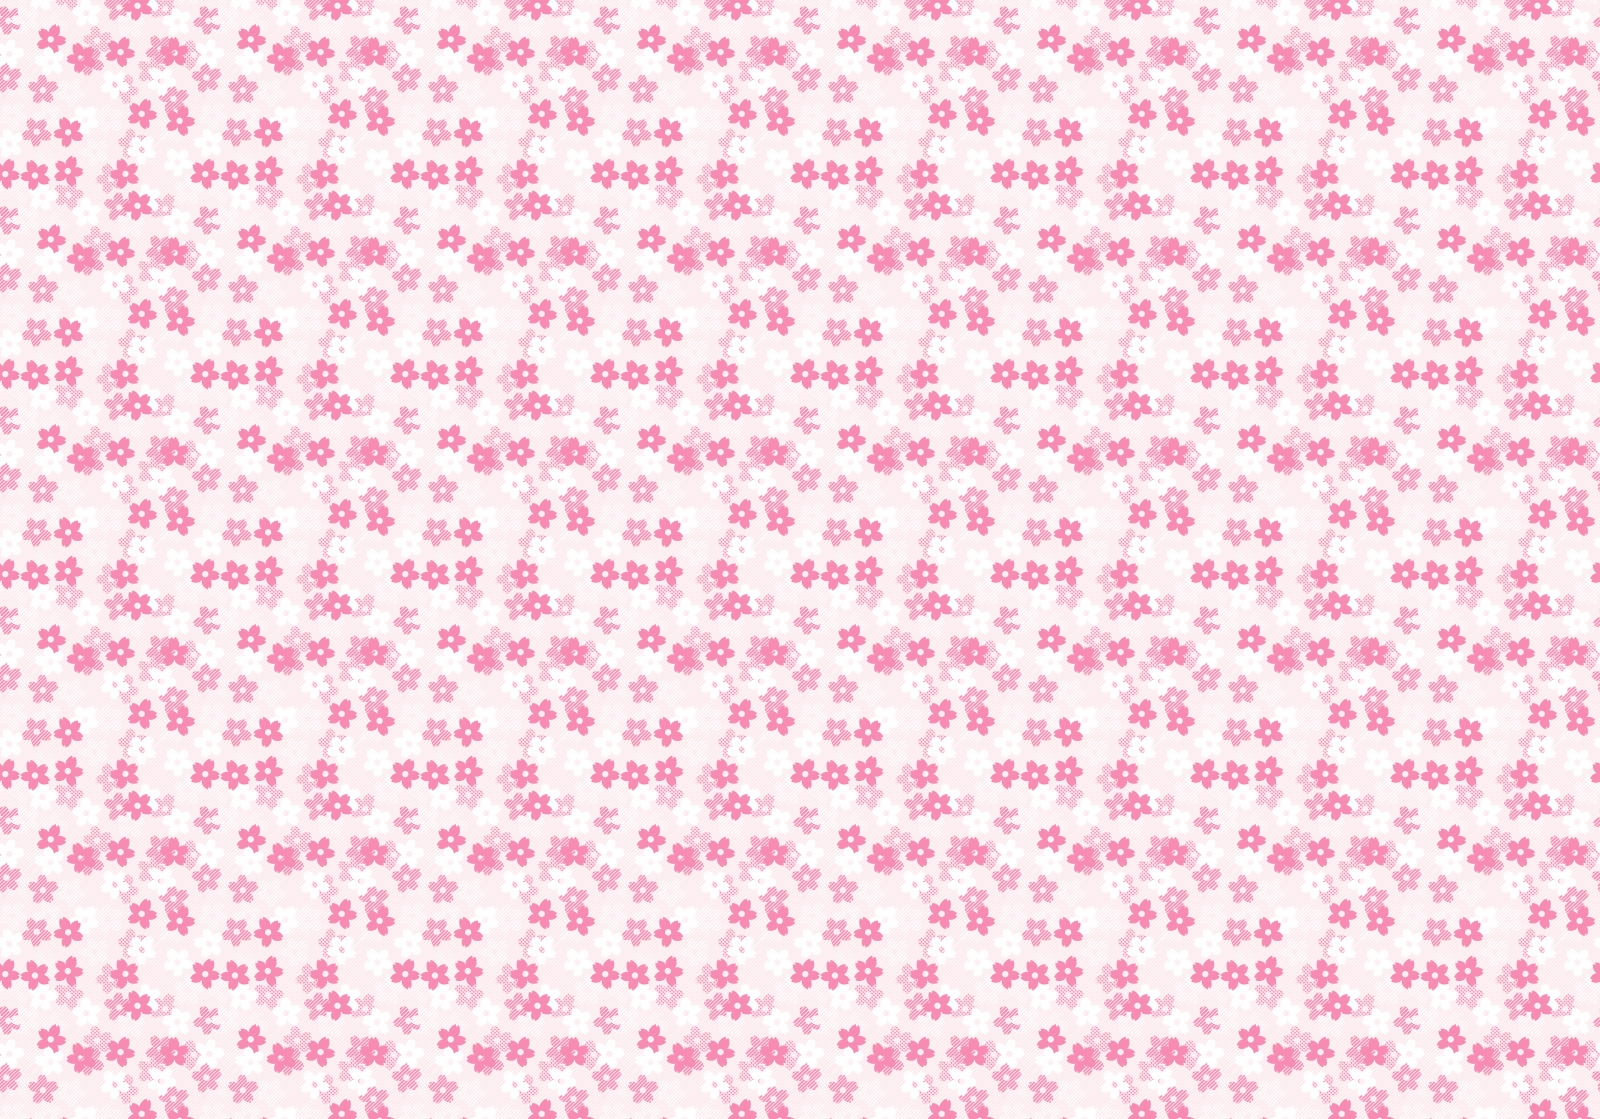  Pink Windows Backgrounds